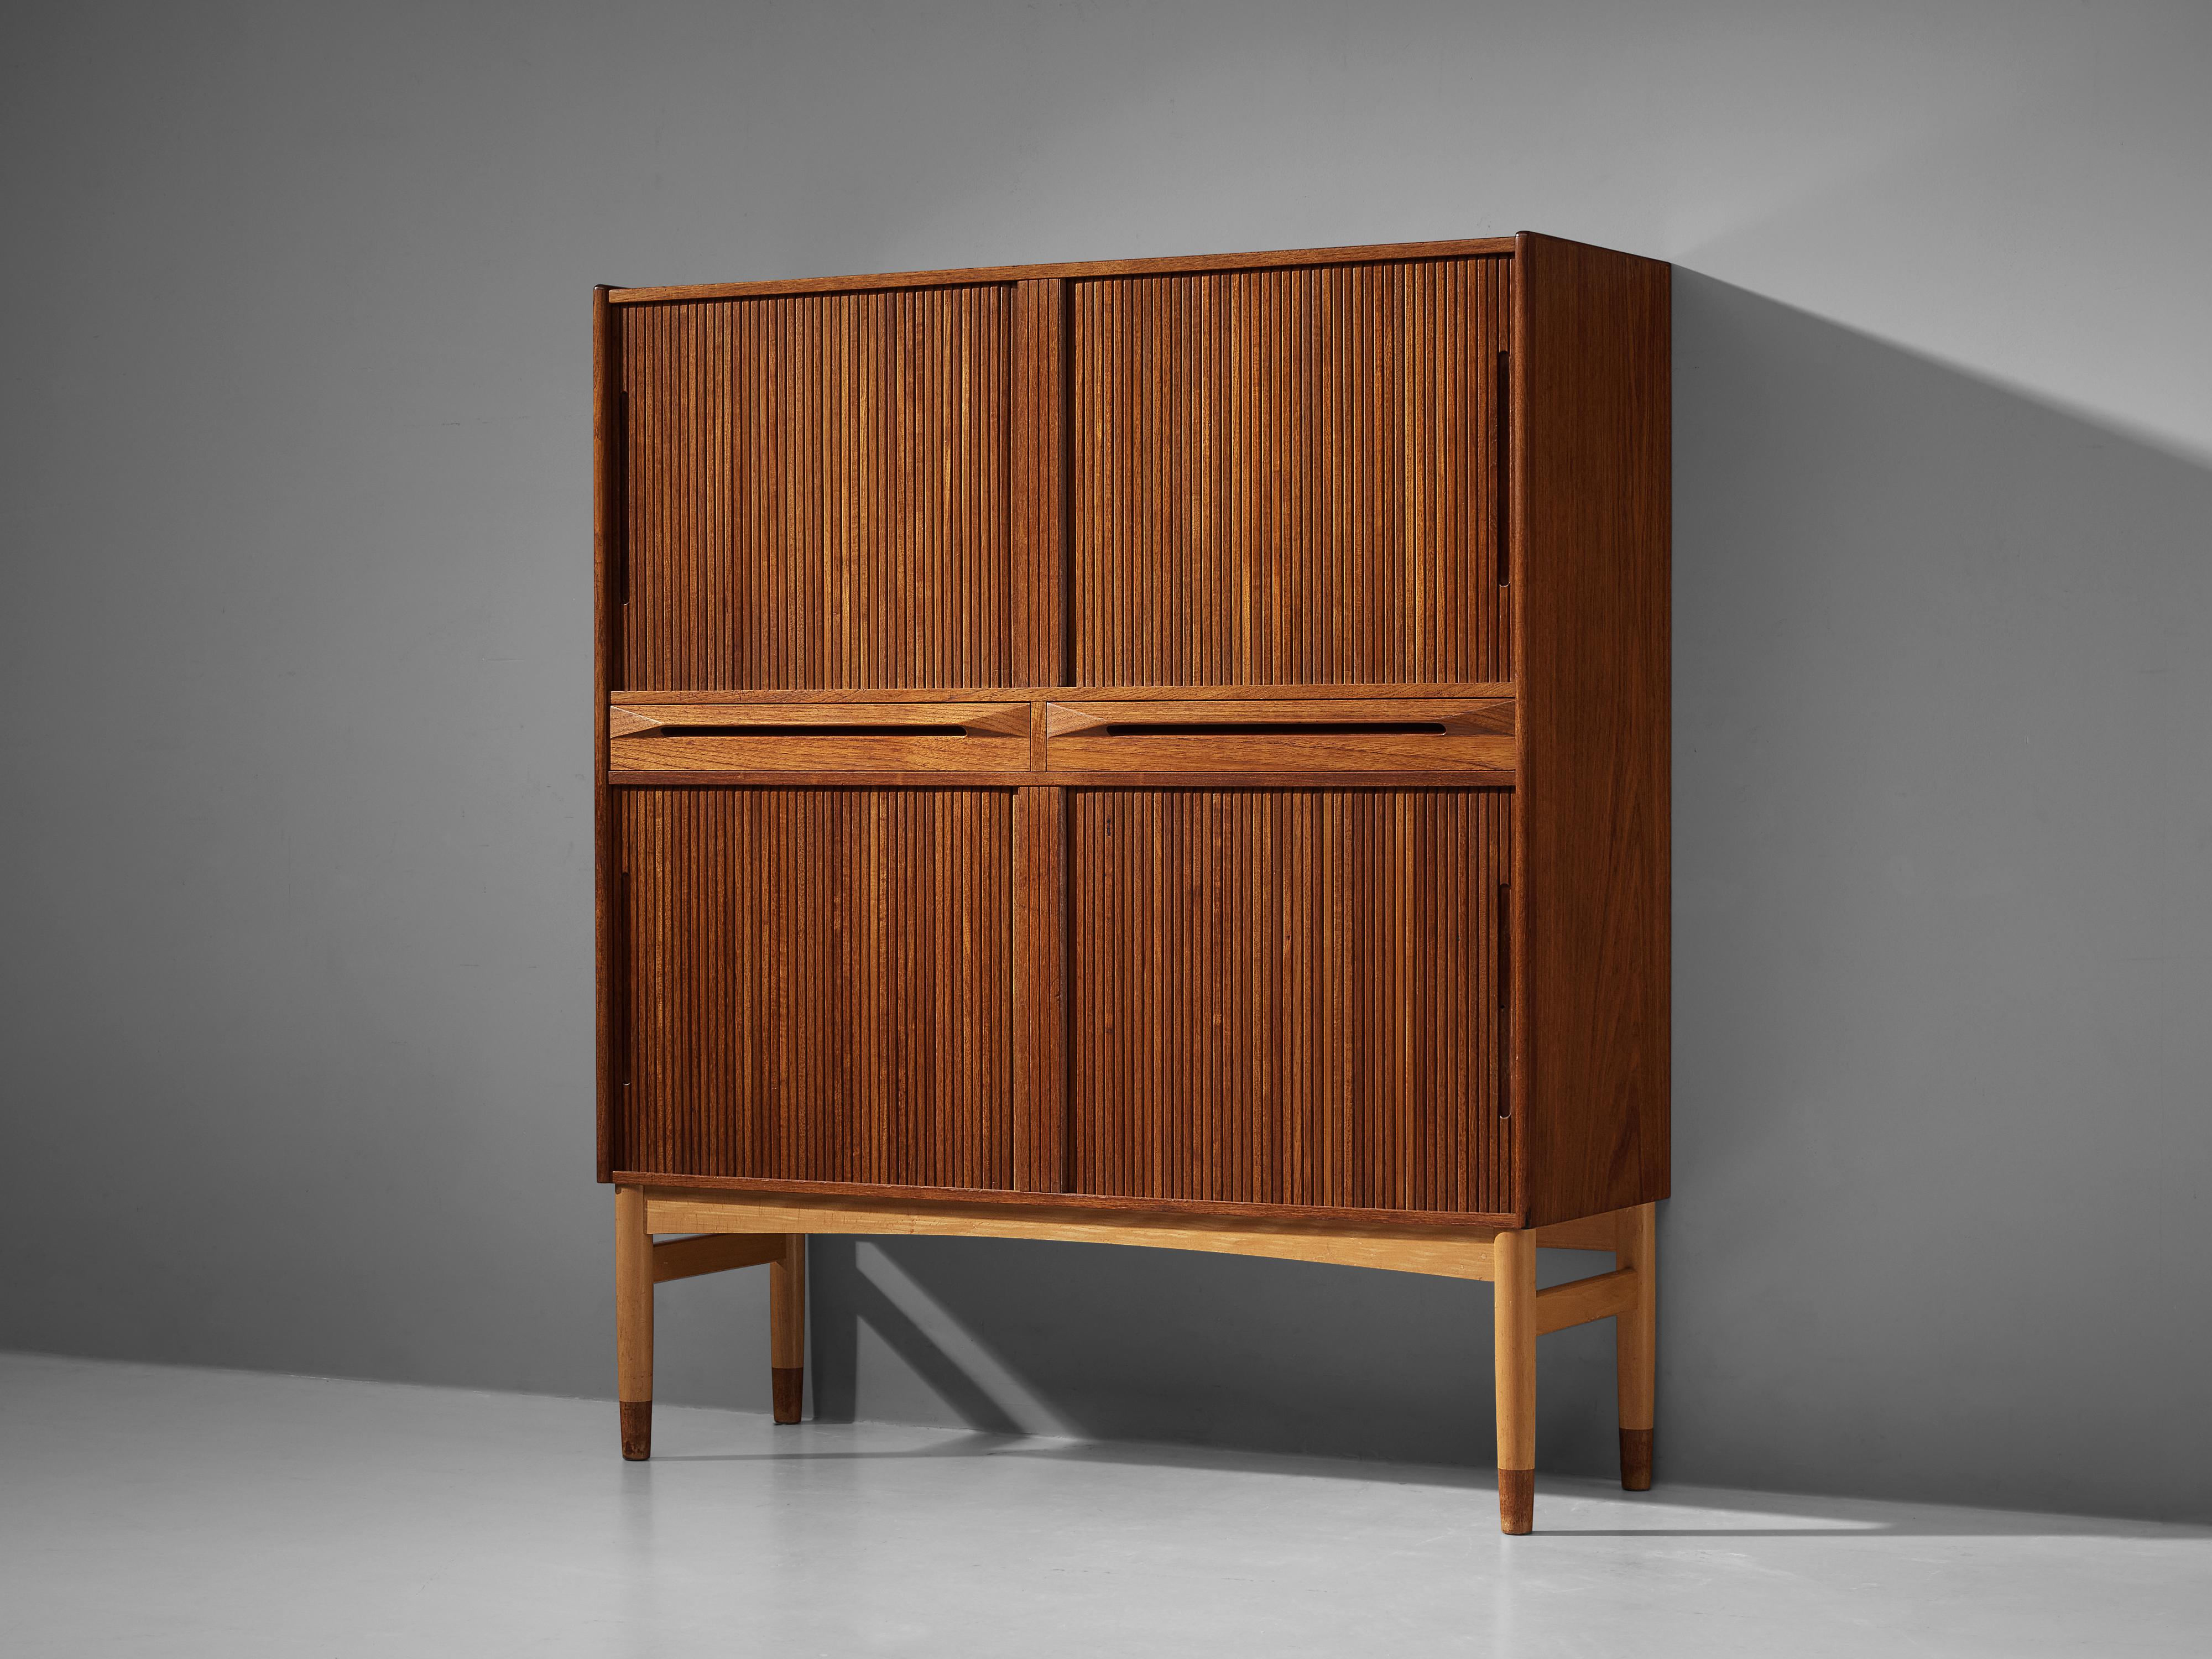 Ib Kofold-Larsen for Fredericia Stolefabrik, cabinet, teak, beech, Denmark, 1950s. 

High quality and fine designed cabinet in teak and beech designed by Ib Kofold-Larsen. This cabinet contains two departments which are furnished with beautiful